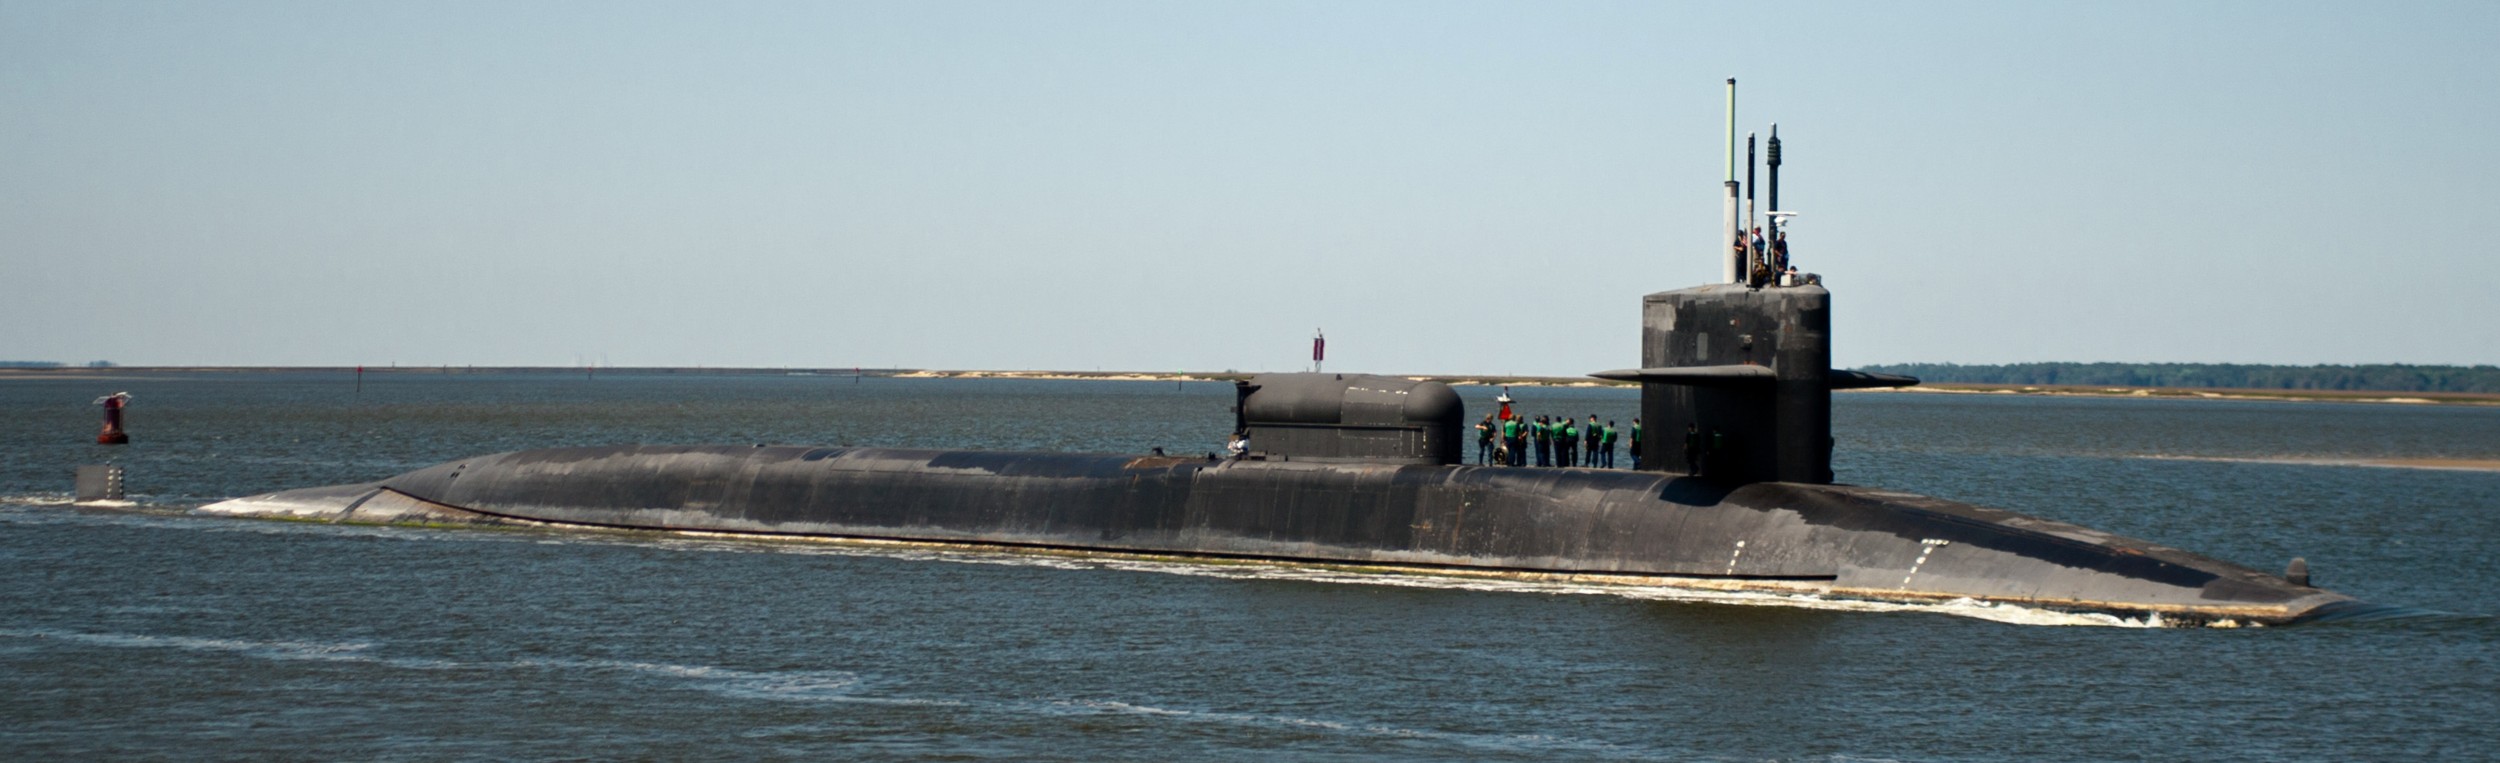 ssgn-728 uss florida guided missile submarine us navy 2011 22 kings bay georgia